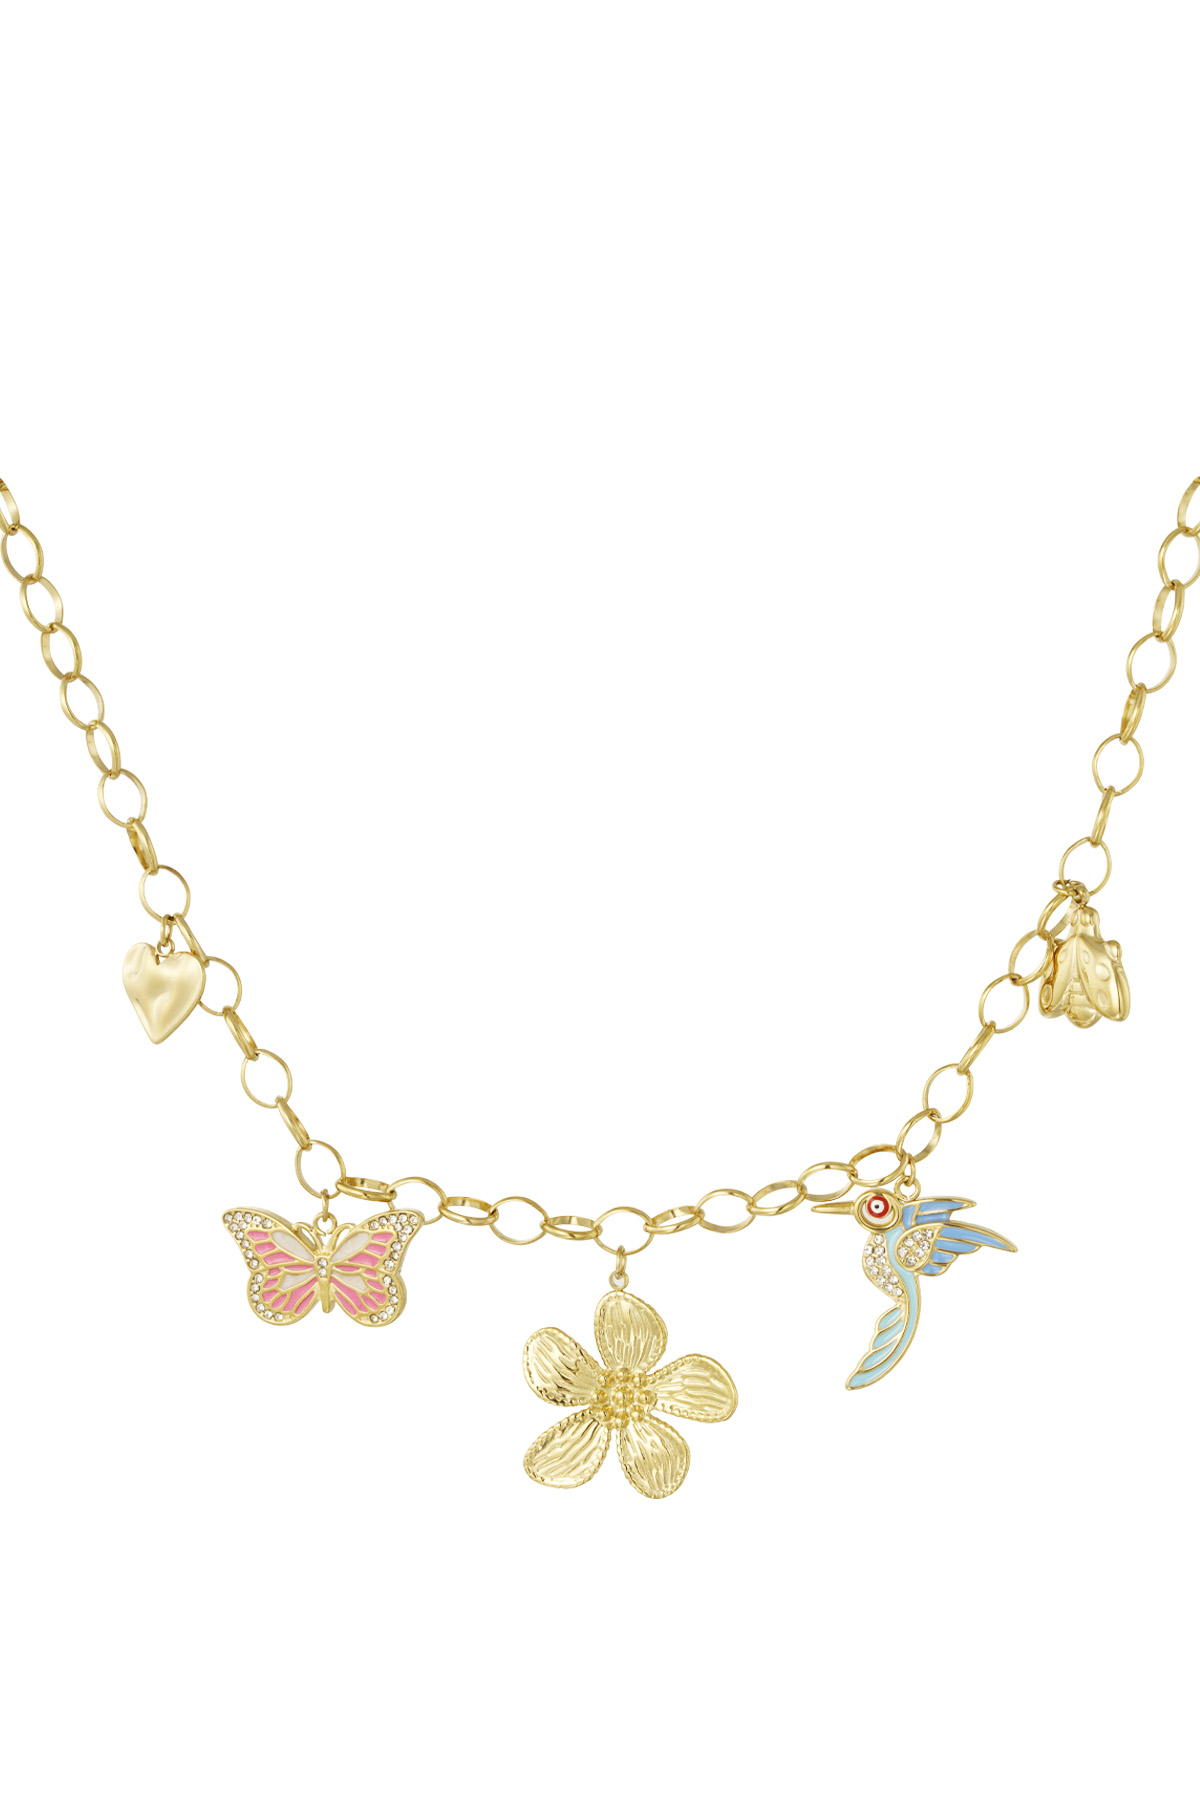 Charm necklace wild floral - gold h5 